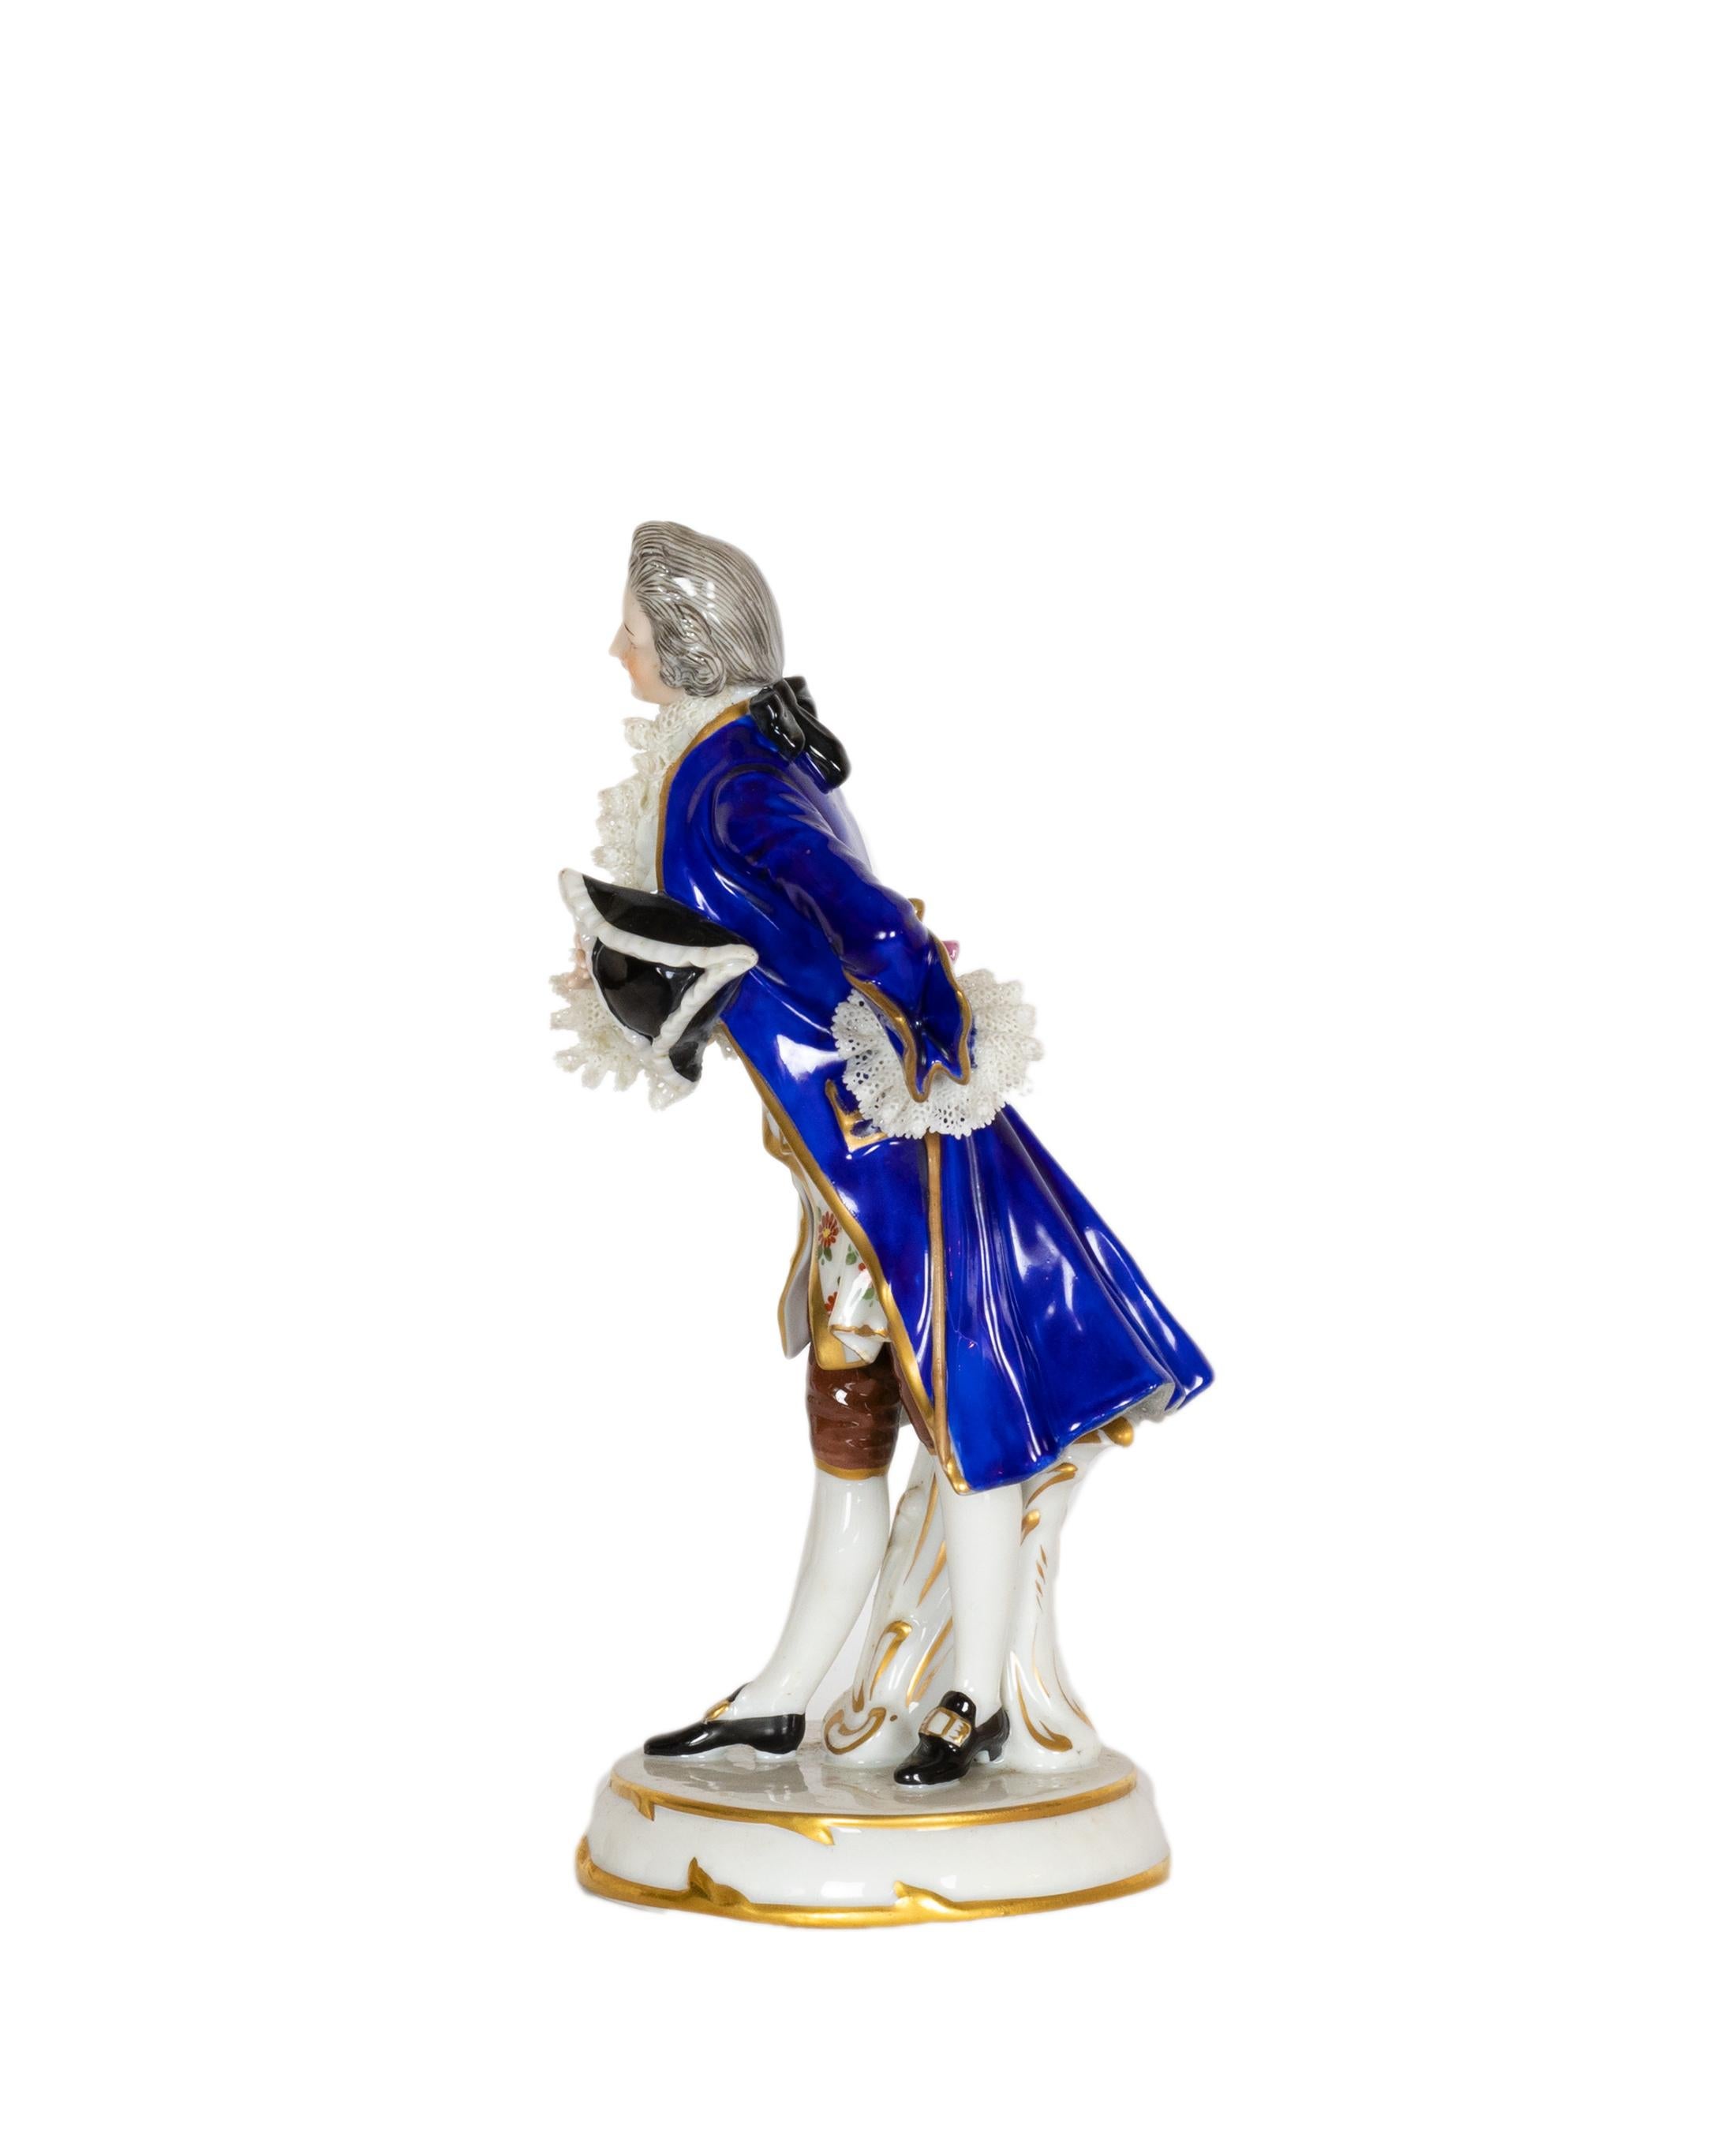 
A porcelain figurine made by Steingutfabrik J. Uffrecht in Dresden, featuring King Luis XIV attired in formal, royal blue, and bearing a crown, with the mark «A J».